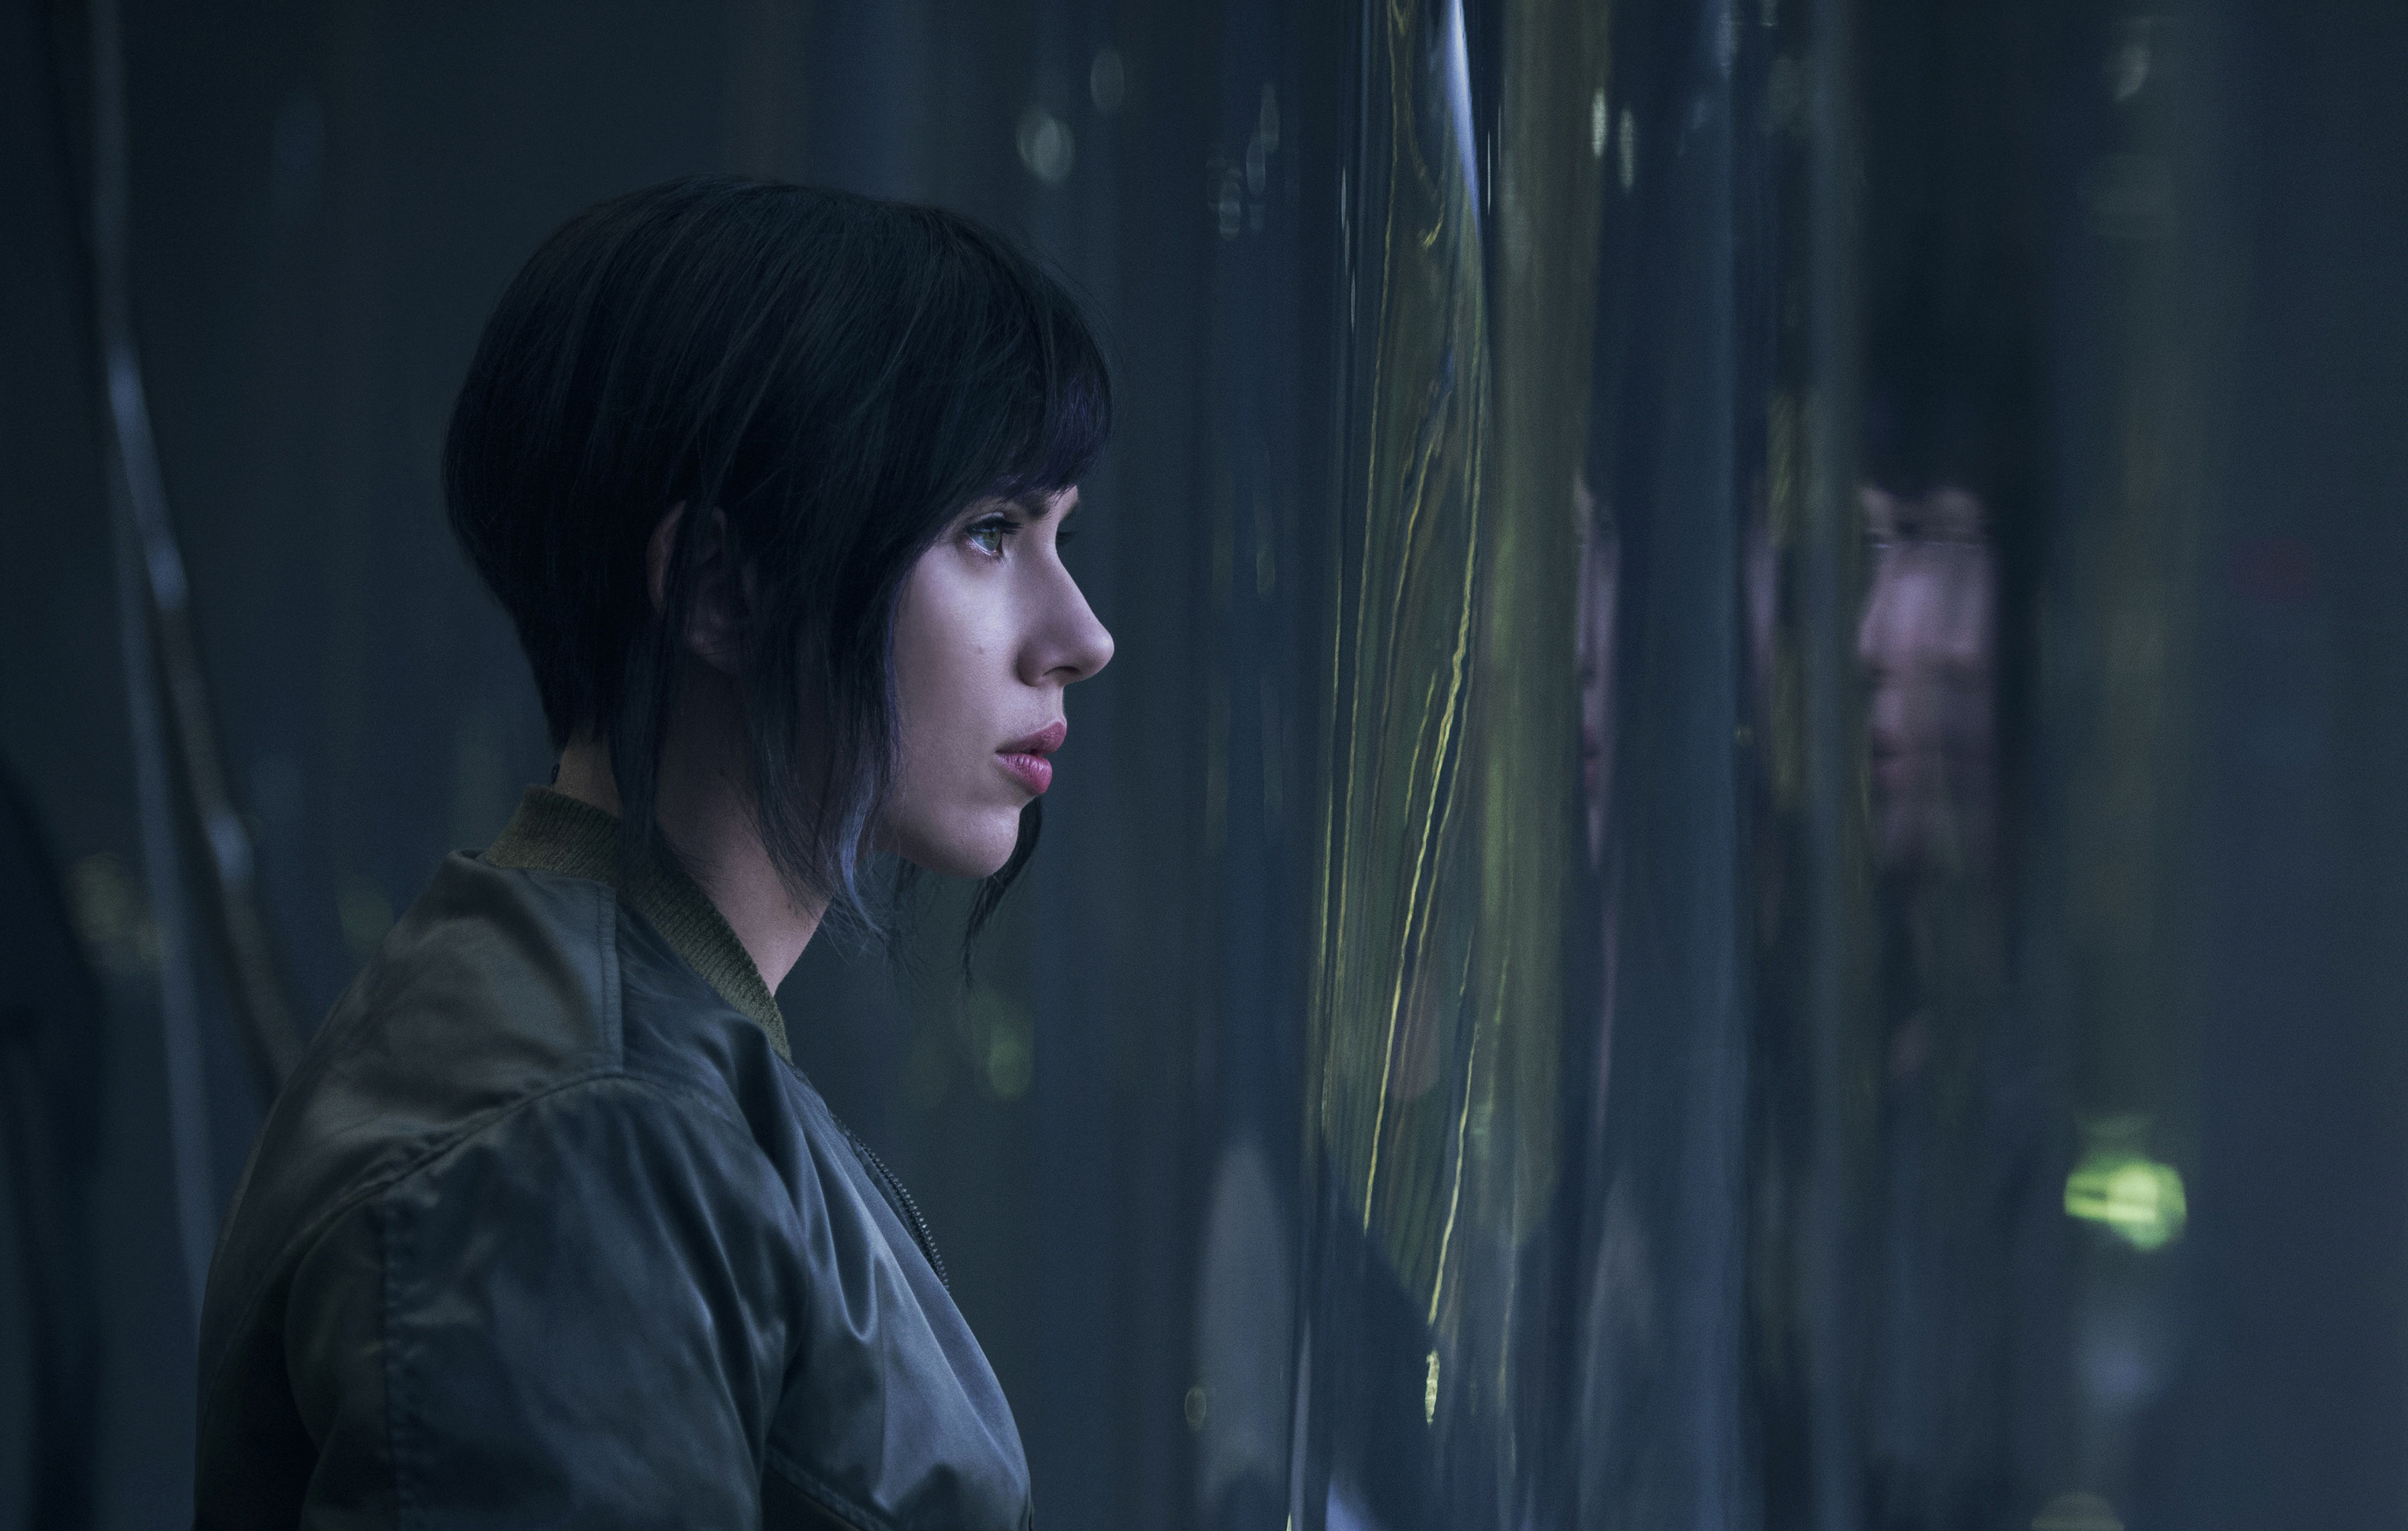 Ghost in the shell estrena 5 mini teasers